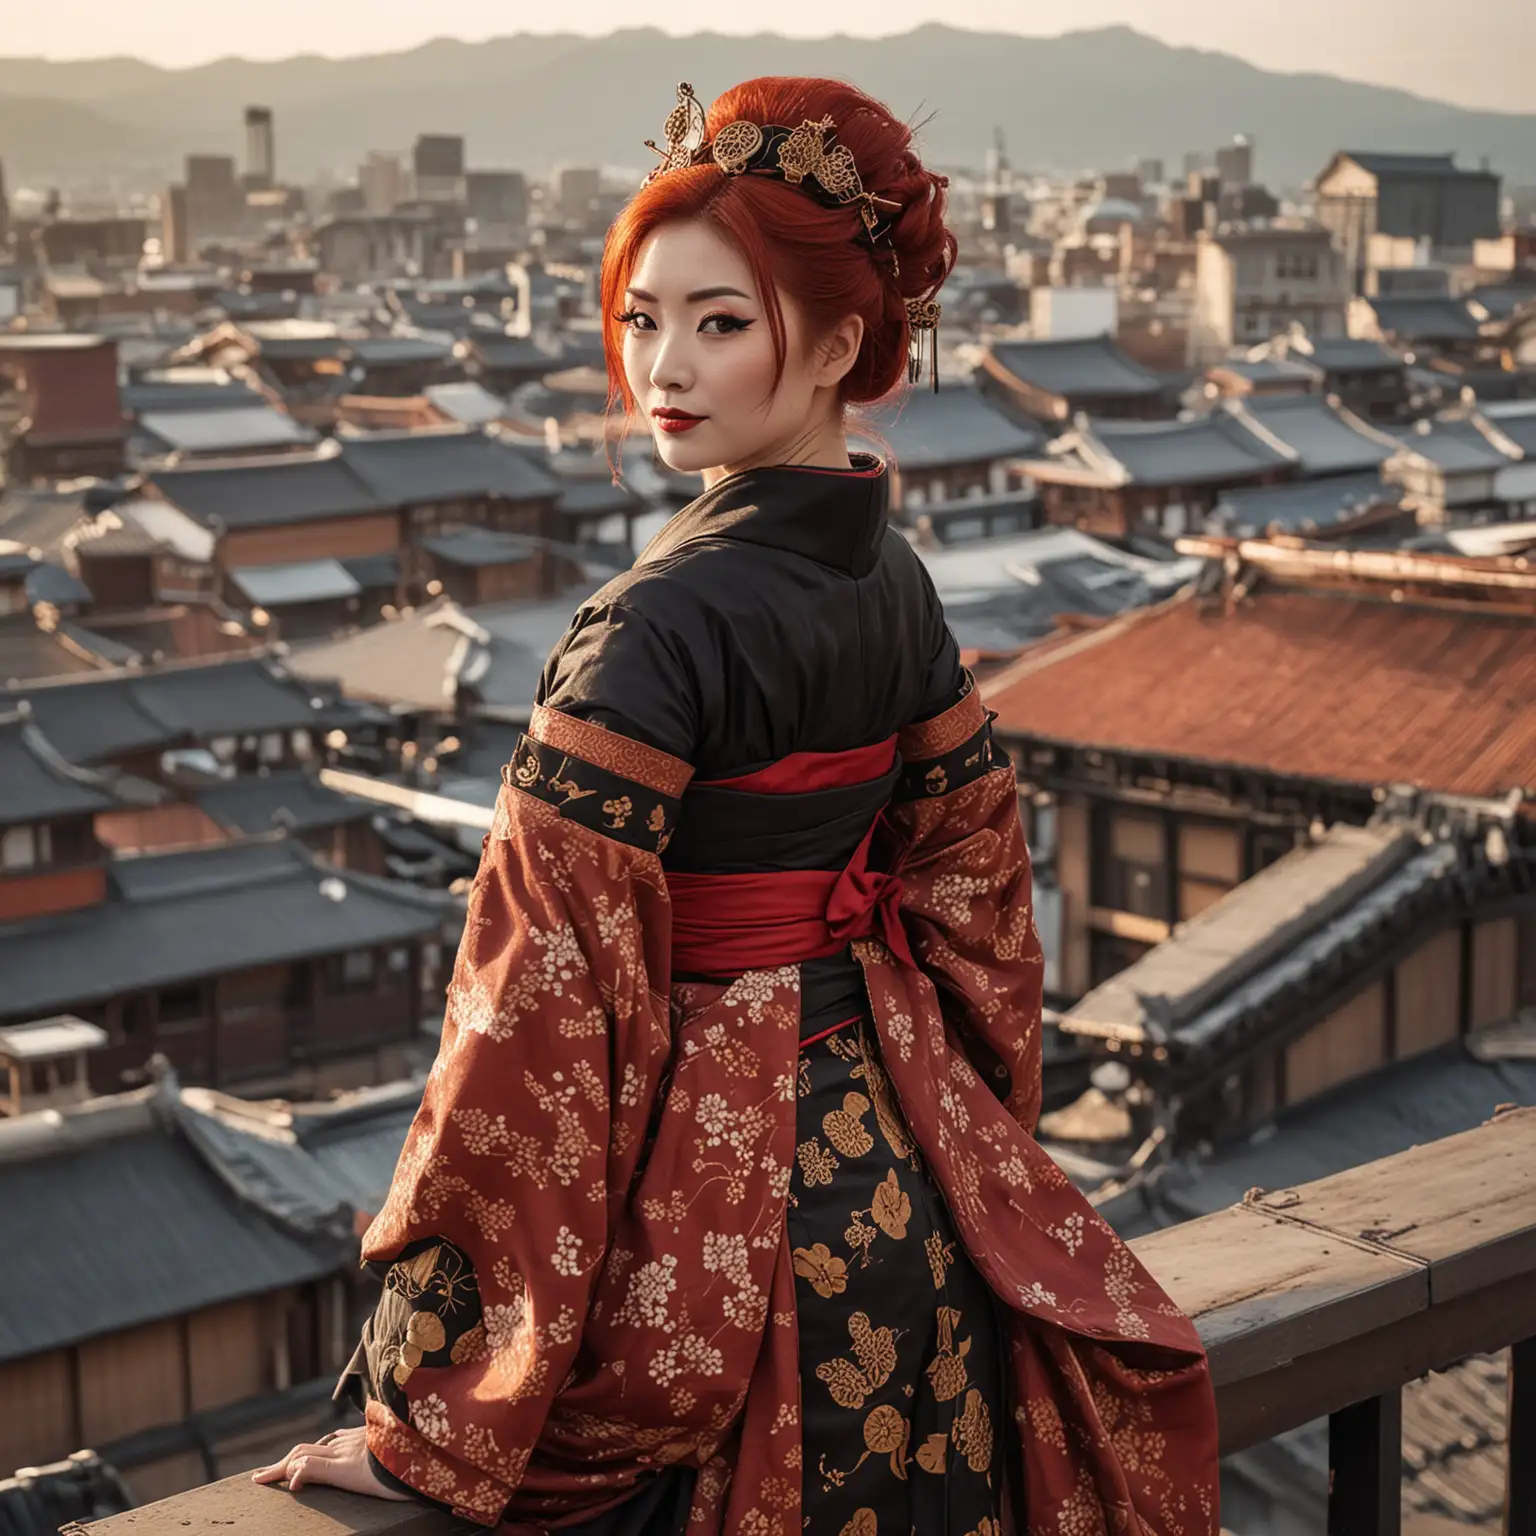 A petite, 40 year old eastern woman with red hair. She is dressed as a steampunk geisha.she is on a rooftop looking over steampunk Kyoto